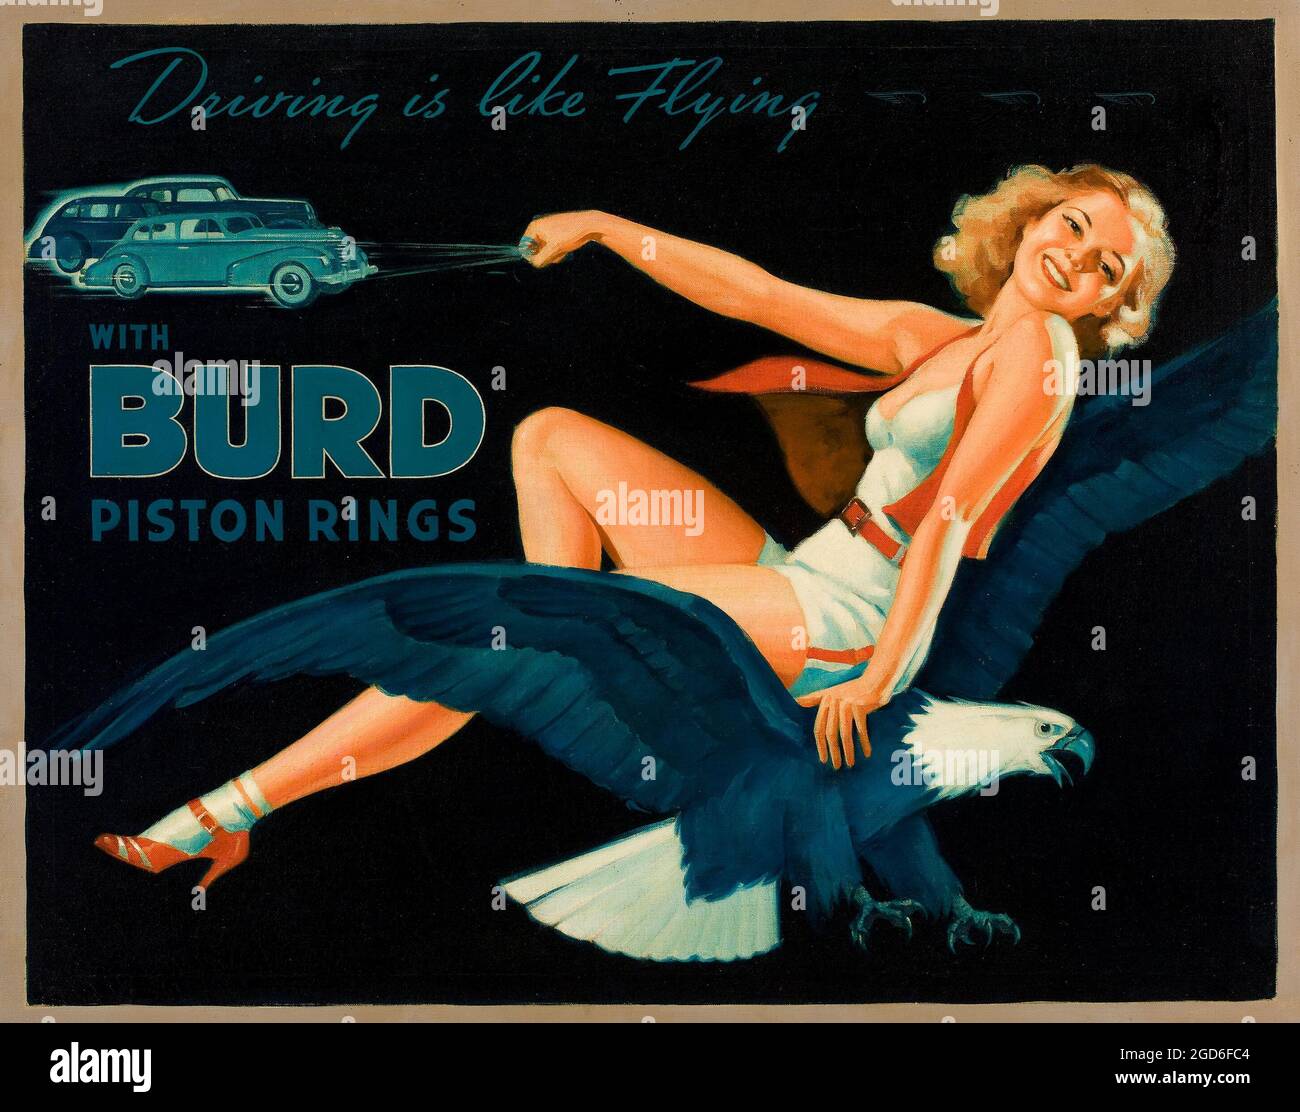 Old and vintage advertisement / poster. Unknown artist (20th Century). Driving is Like Flying, Burd Piston Rings ad illustration. Oil on canvas Stock Photo